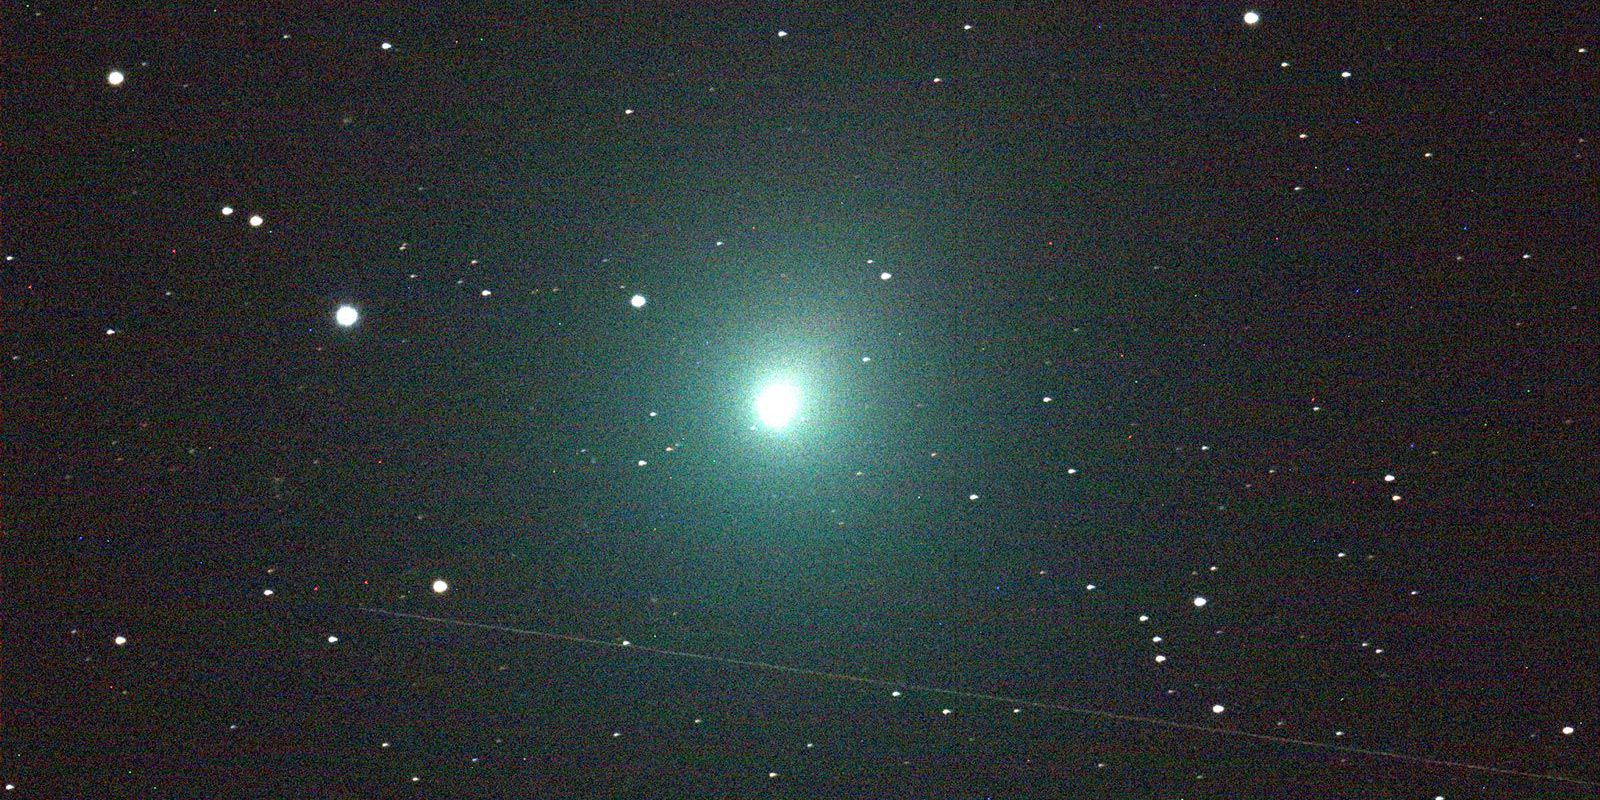 Comet approaching Earth will be visible from February